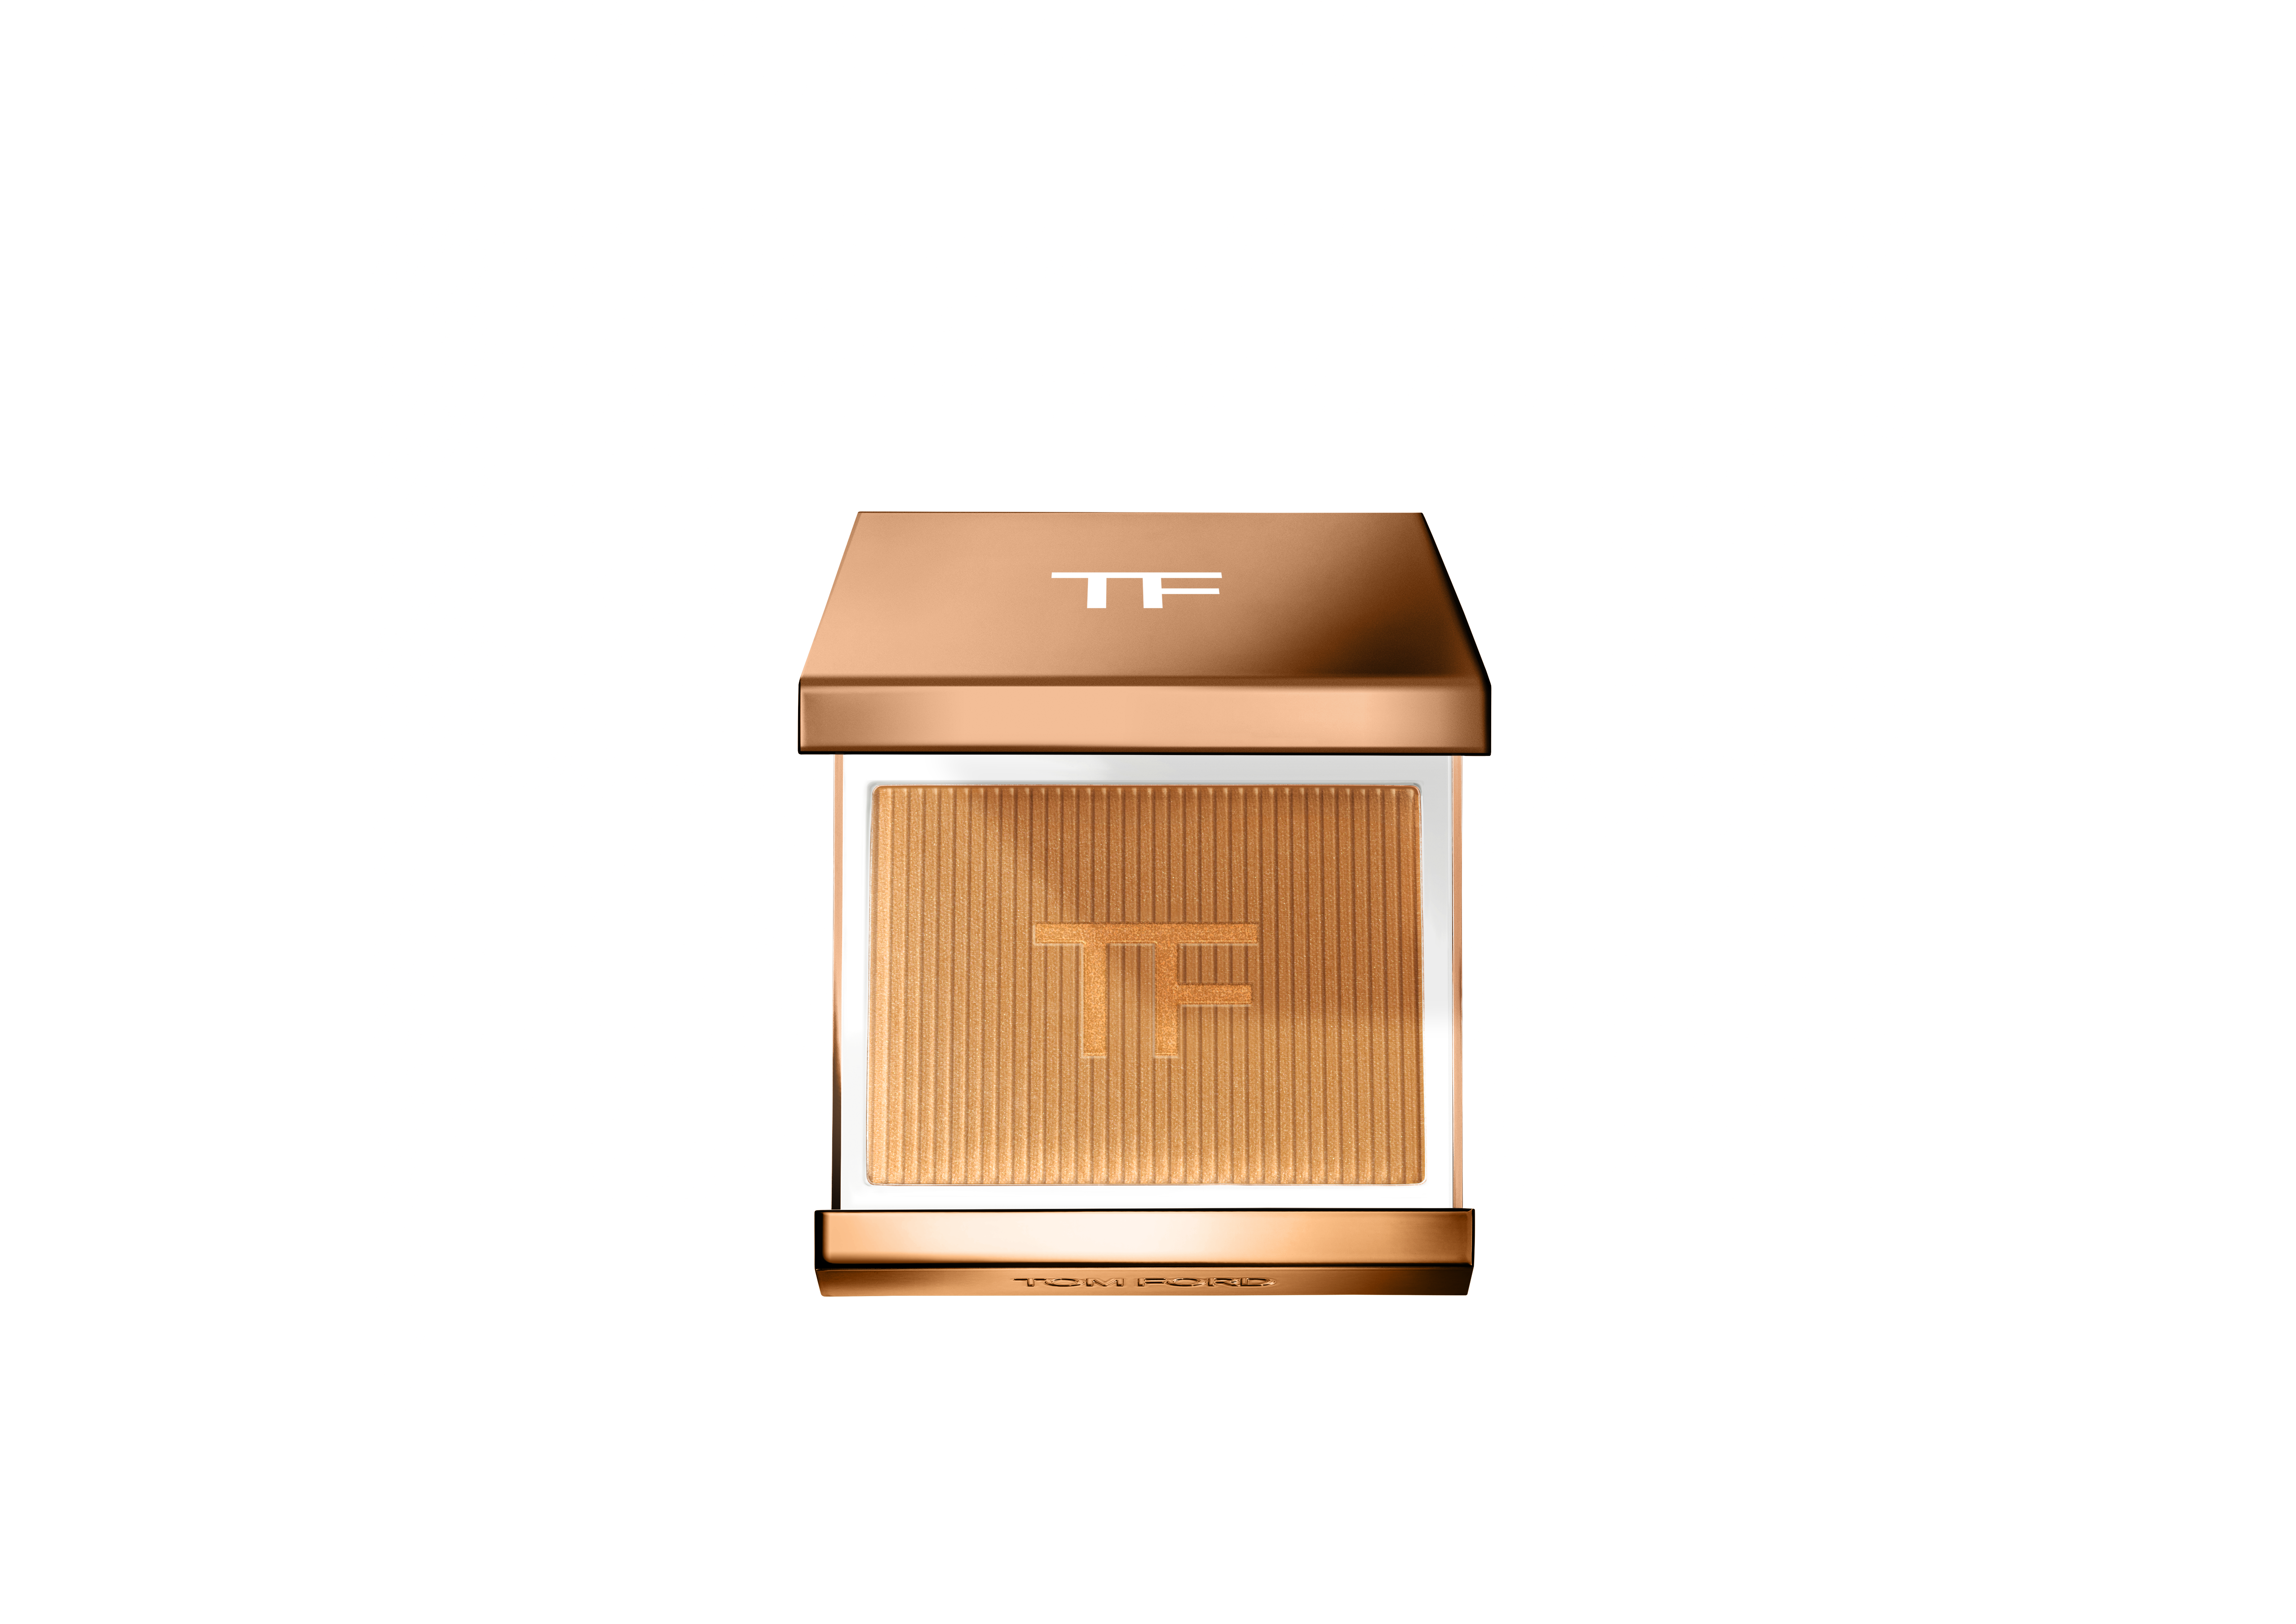 Tom ford soleil de feu glow highlighter Oasis : shimmering neutral bronze •  Browse my swatch with hashtag…